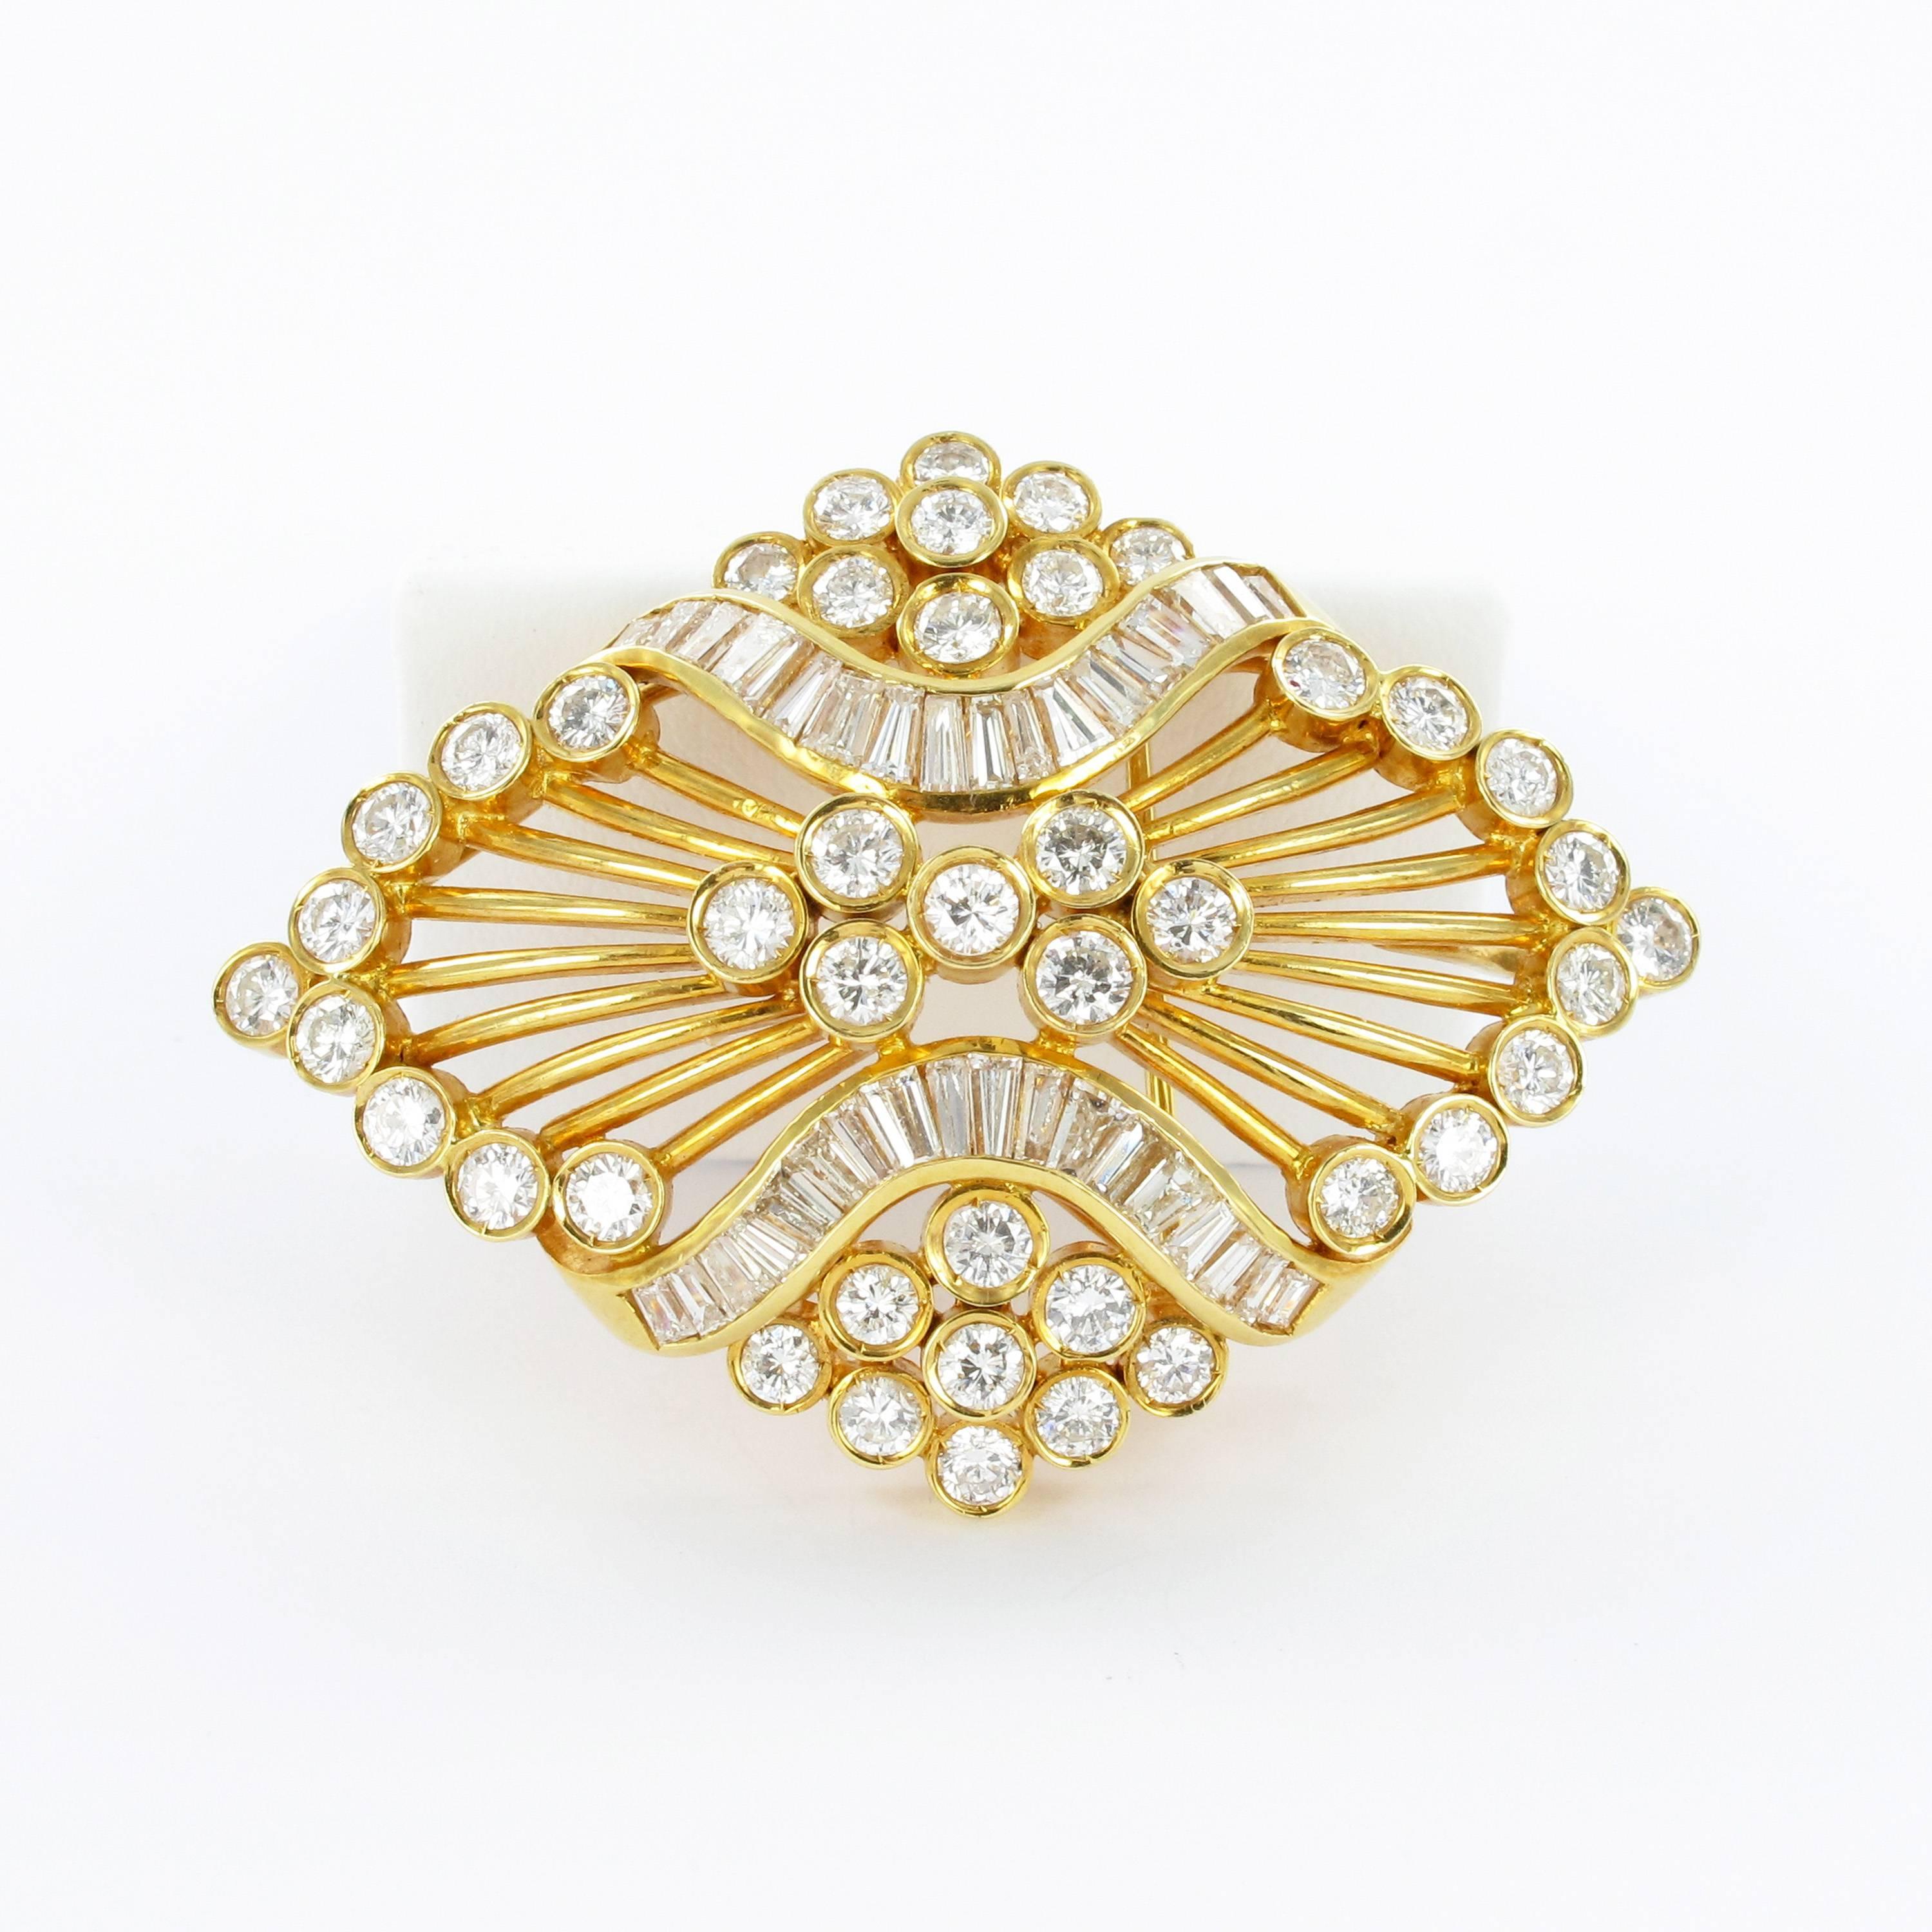 The brooch/pendant is manufactured in yellow gold 750. Additional eyelet for chain. Beautifully arranged round brilliant-cut and tapered-cut diamonds, total weight approximately 5.00 carats (G/H colour and si clarity). Approximately 45 x 35mm in